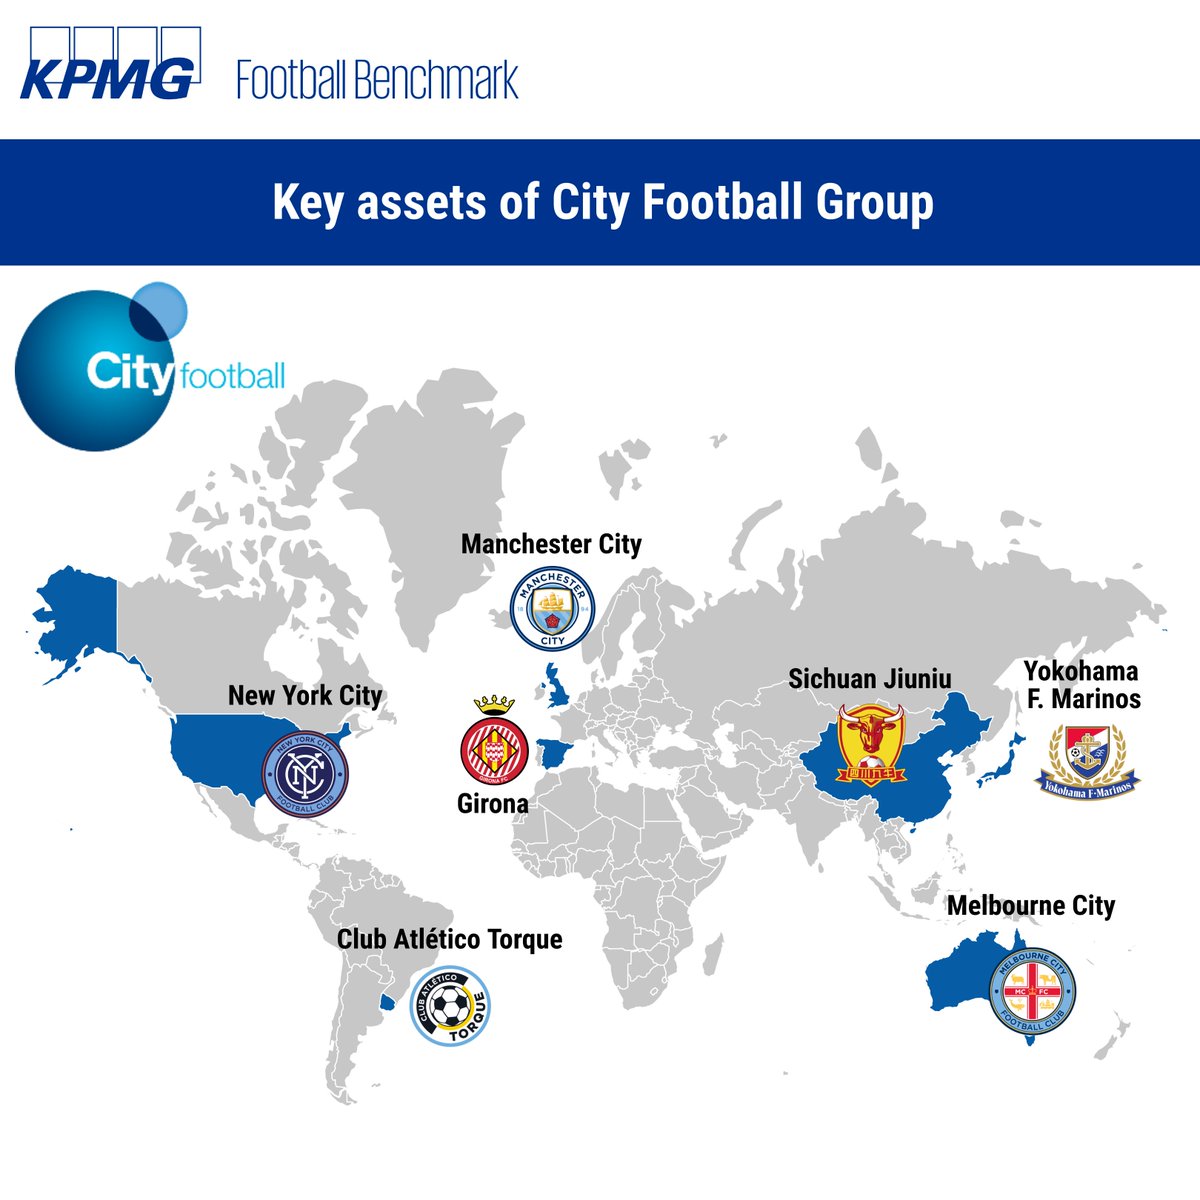 Kpmg Football Benchmark City Football Group Cfg The Owner Of Epl Champions Mancity Is Selling An Over 10 Per Cent Stake In Its Business To Us Private Equity Firm Silver